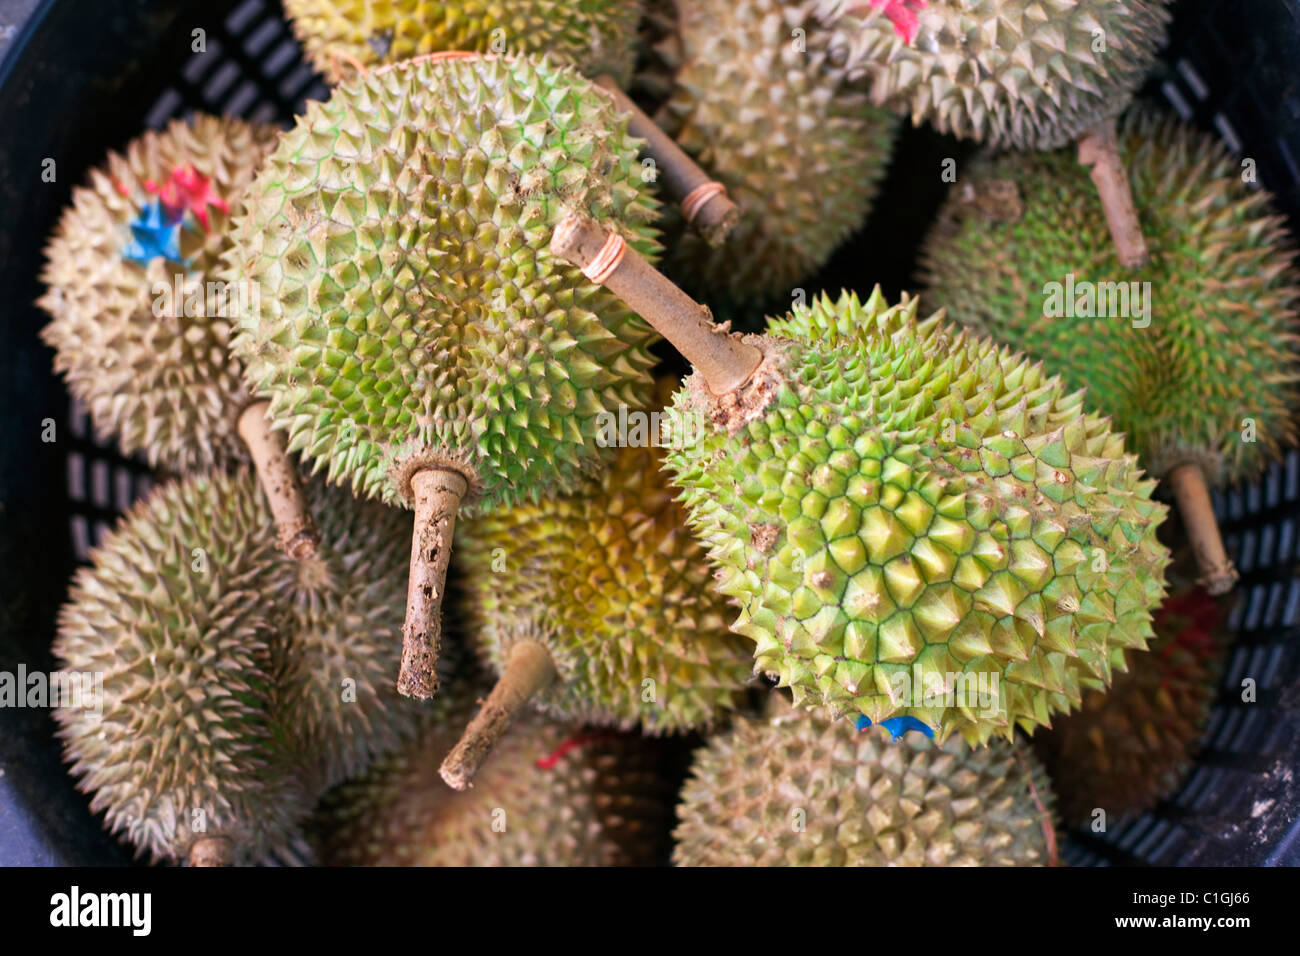 Durians (tropical fruit) for sale in the markets.  Bugis, Singapore Stock Photo